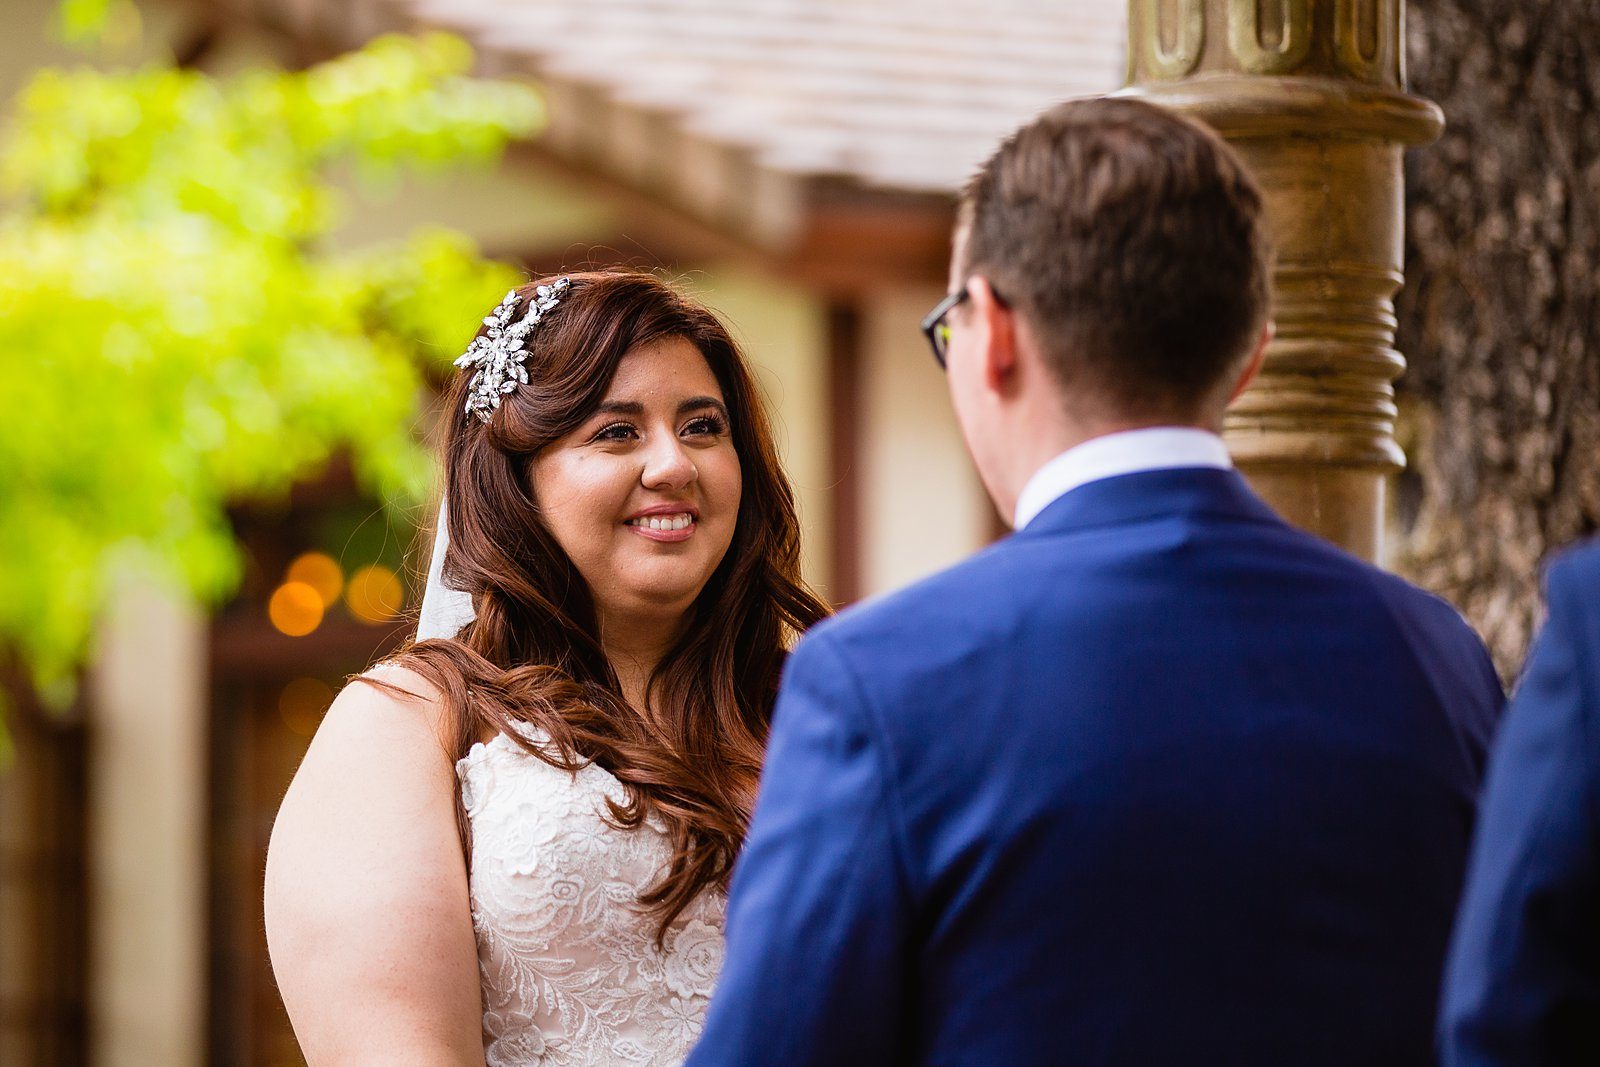 Bride looking at her groom during their wedding ceremony at The Wright House Provencal by Mesa wedding photographer PMA Photography.